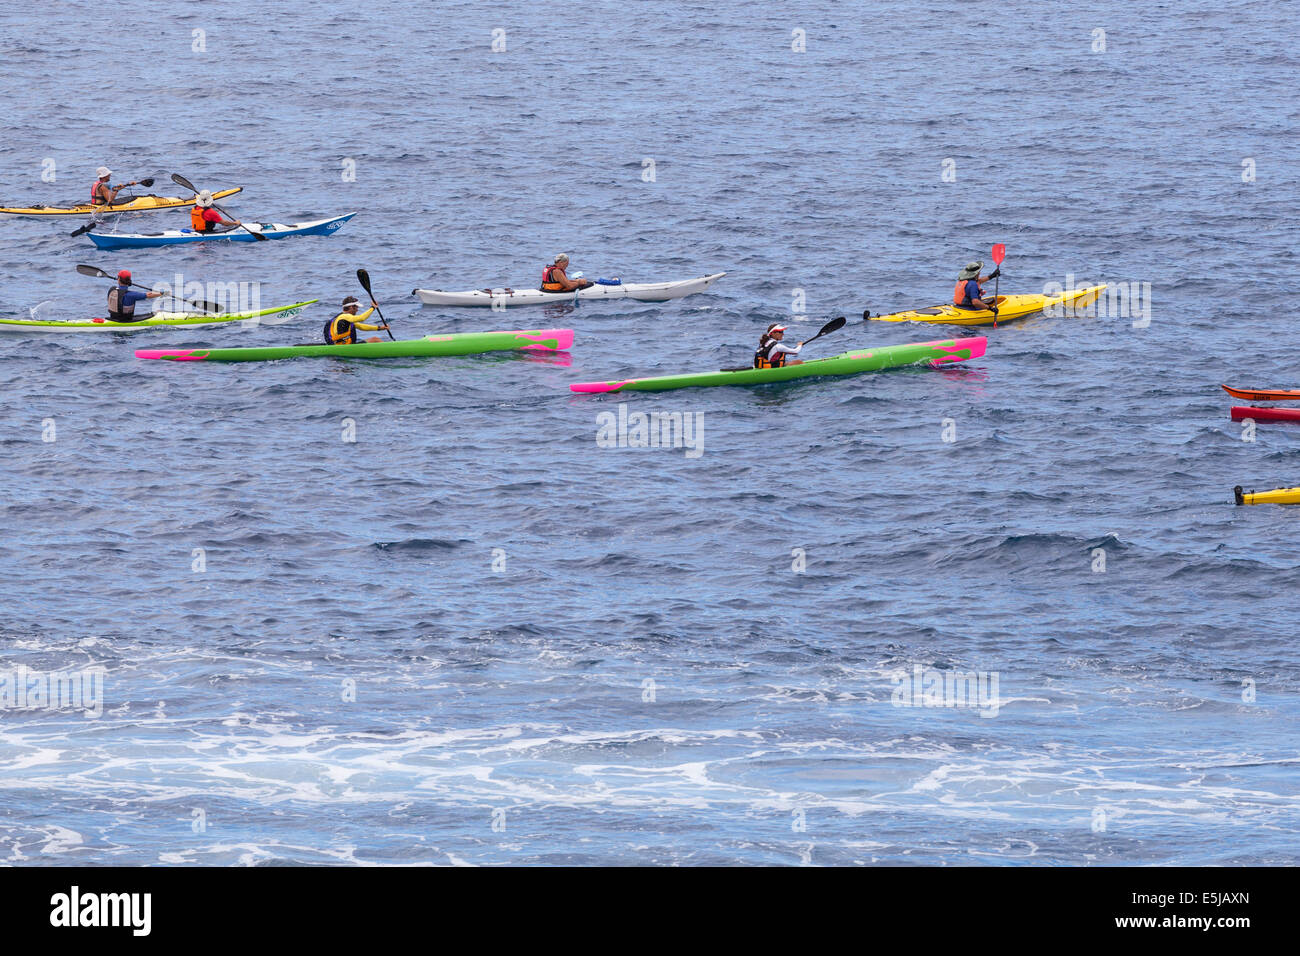 Tenerife, Canary Islands, Spain. 2nd Aug, 2014. Myriam Guillot and Jacky Boisset. World champion adventure racers take part in the 4th annual kayak race from Playa San Juan, to Los Gigantes and back. The race is an event in the programme of the village's annual fiesta in honor of San Juan Bautista and Nuestra Senora del Carmen. Tenerife, Canary Islands, Spain. Credit:  Phil Crean A/Alamy Live News Stock Photo